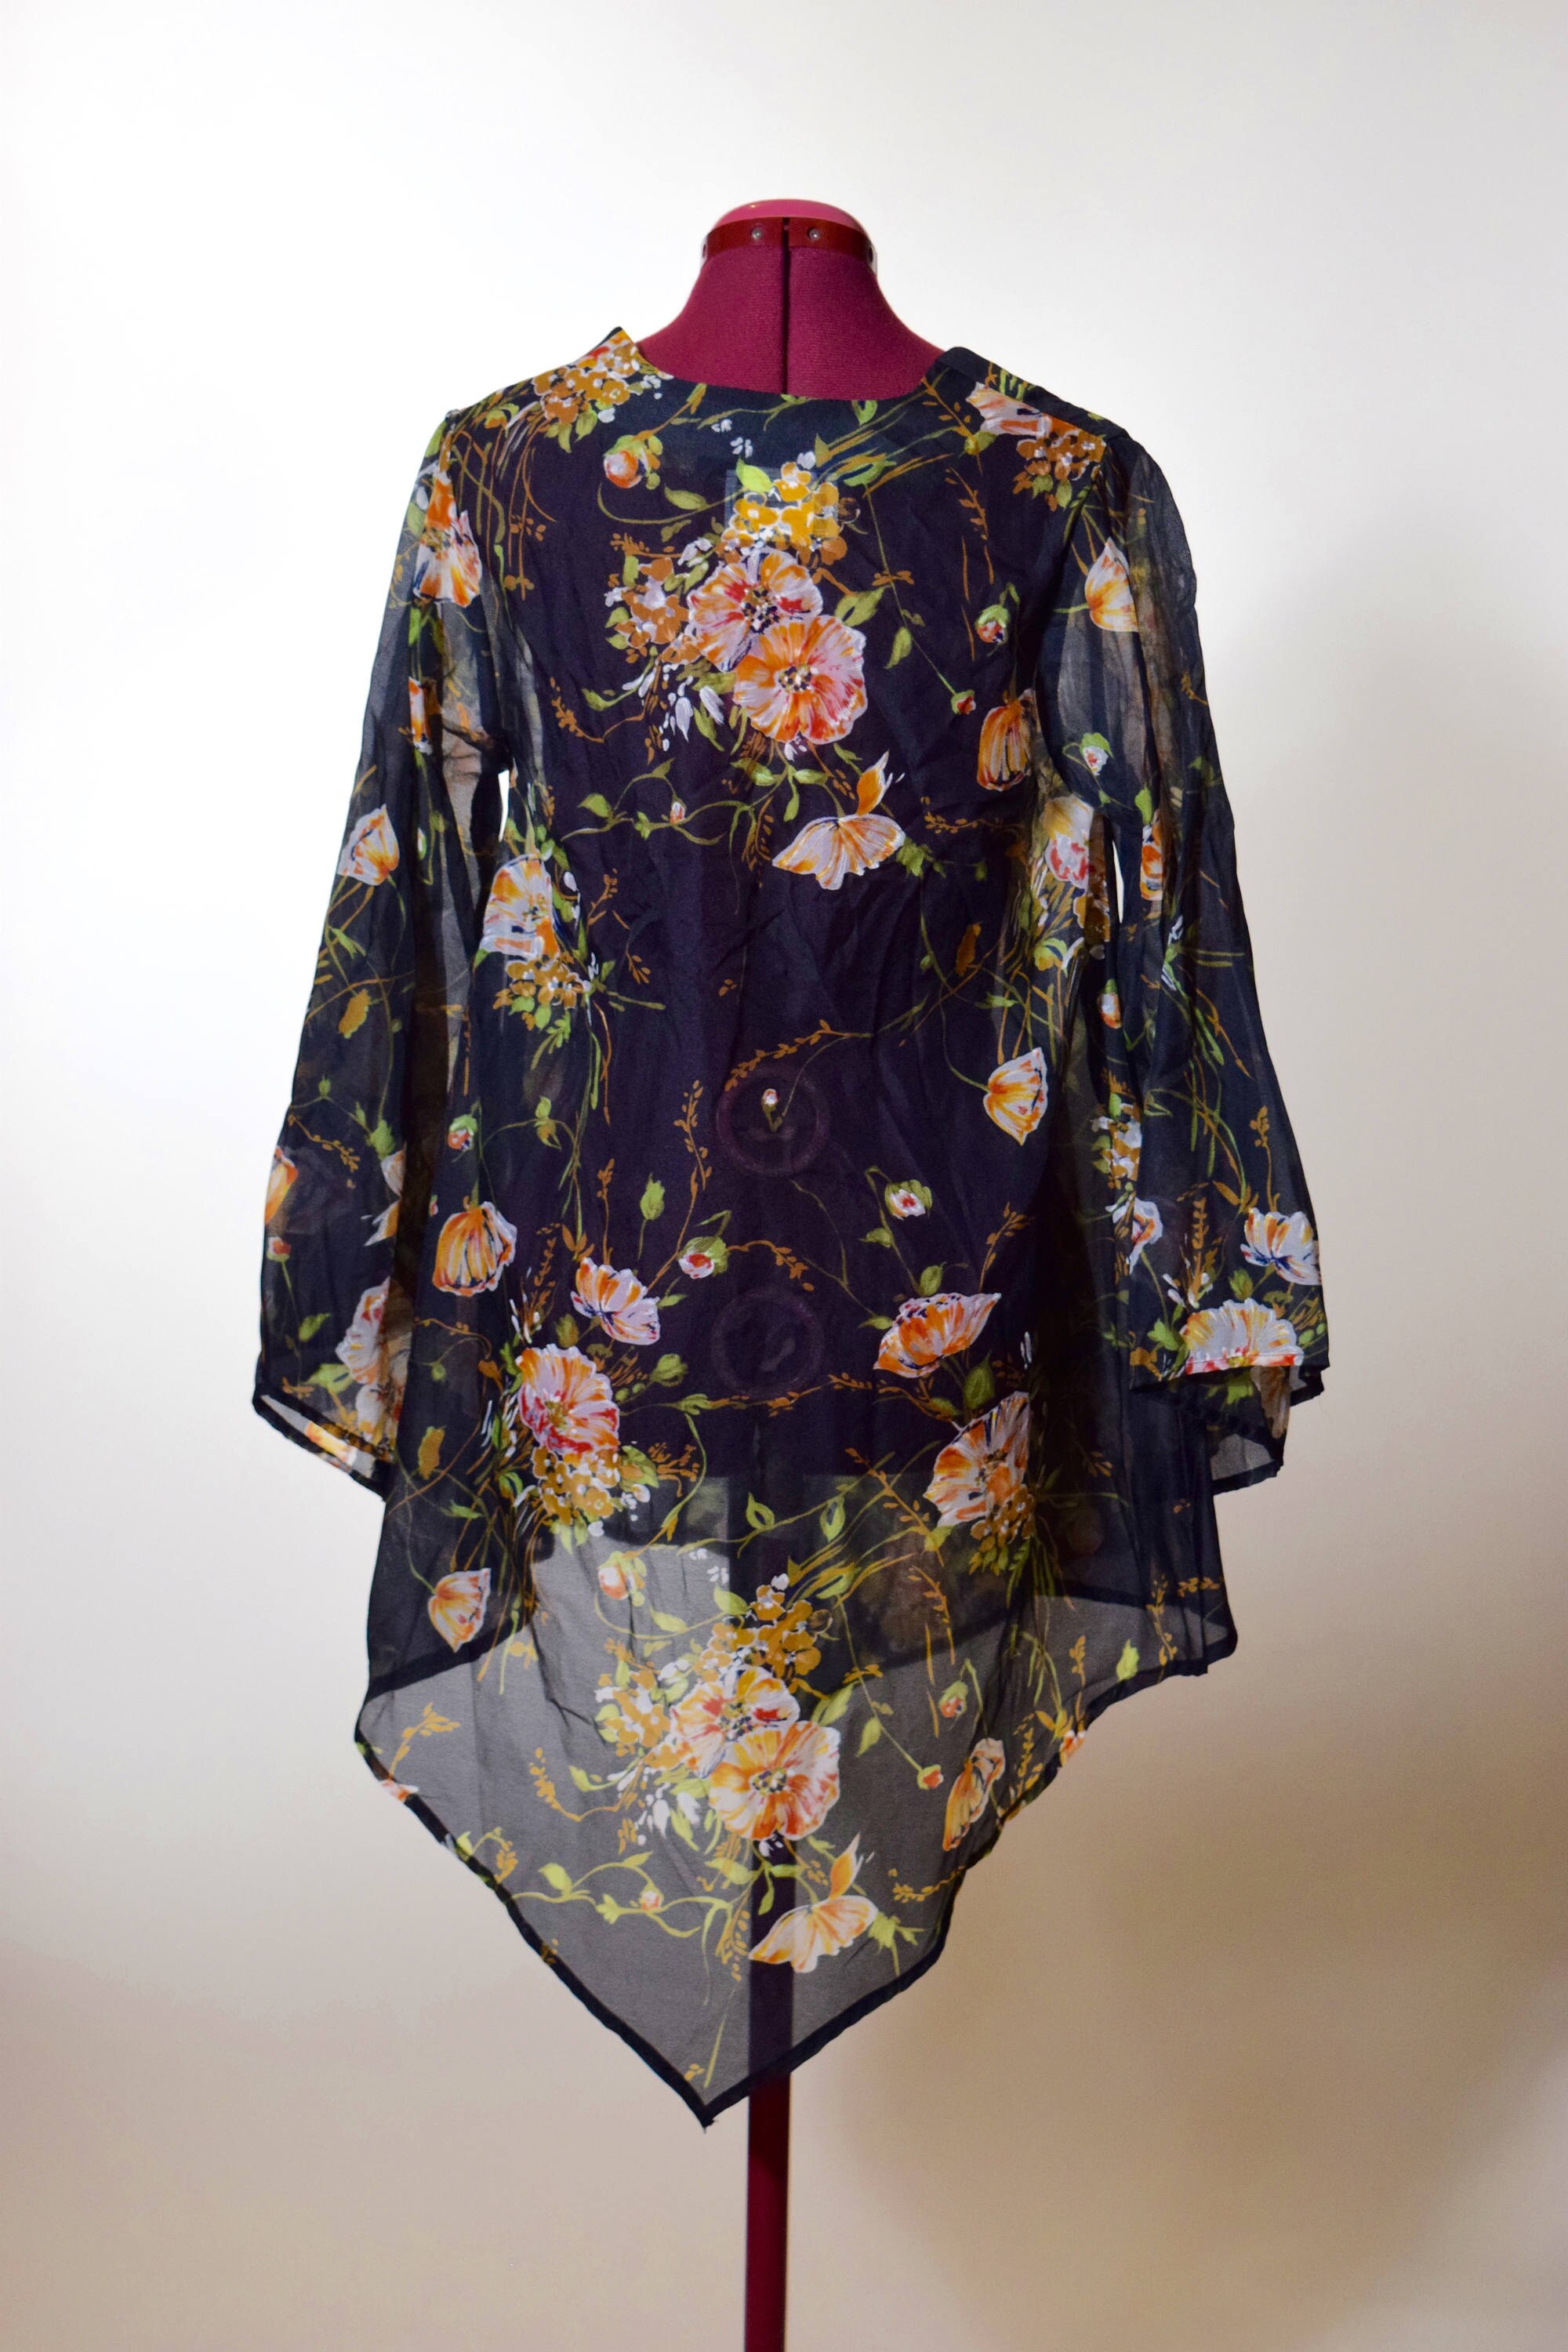 Authentic vintage floral sheer tunic/dress with long butterfly sleeves ...